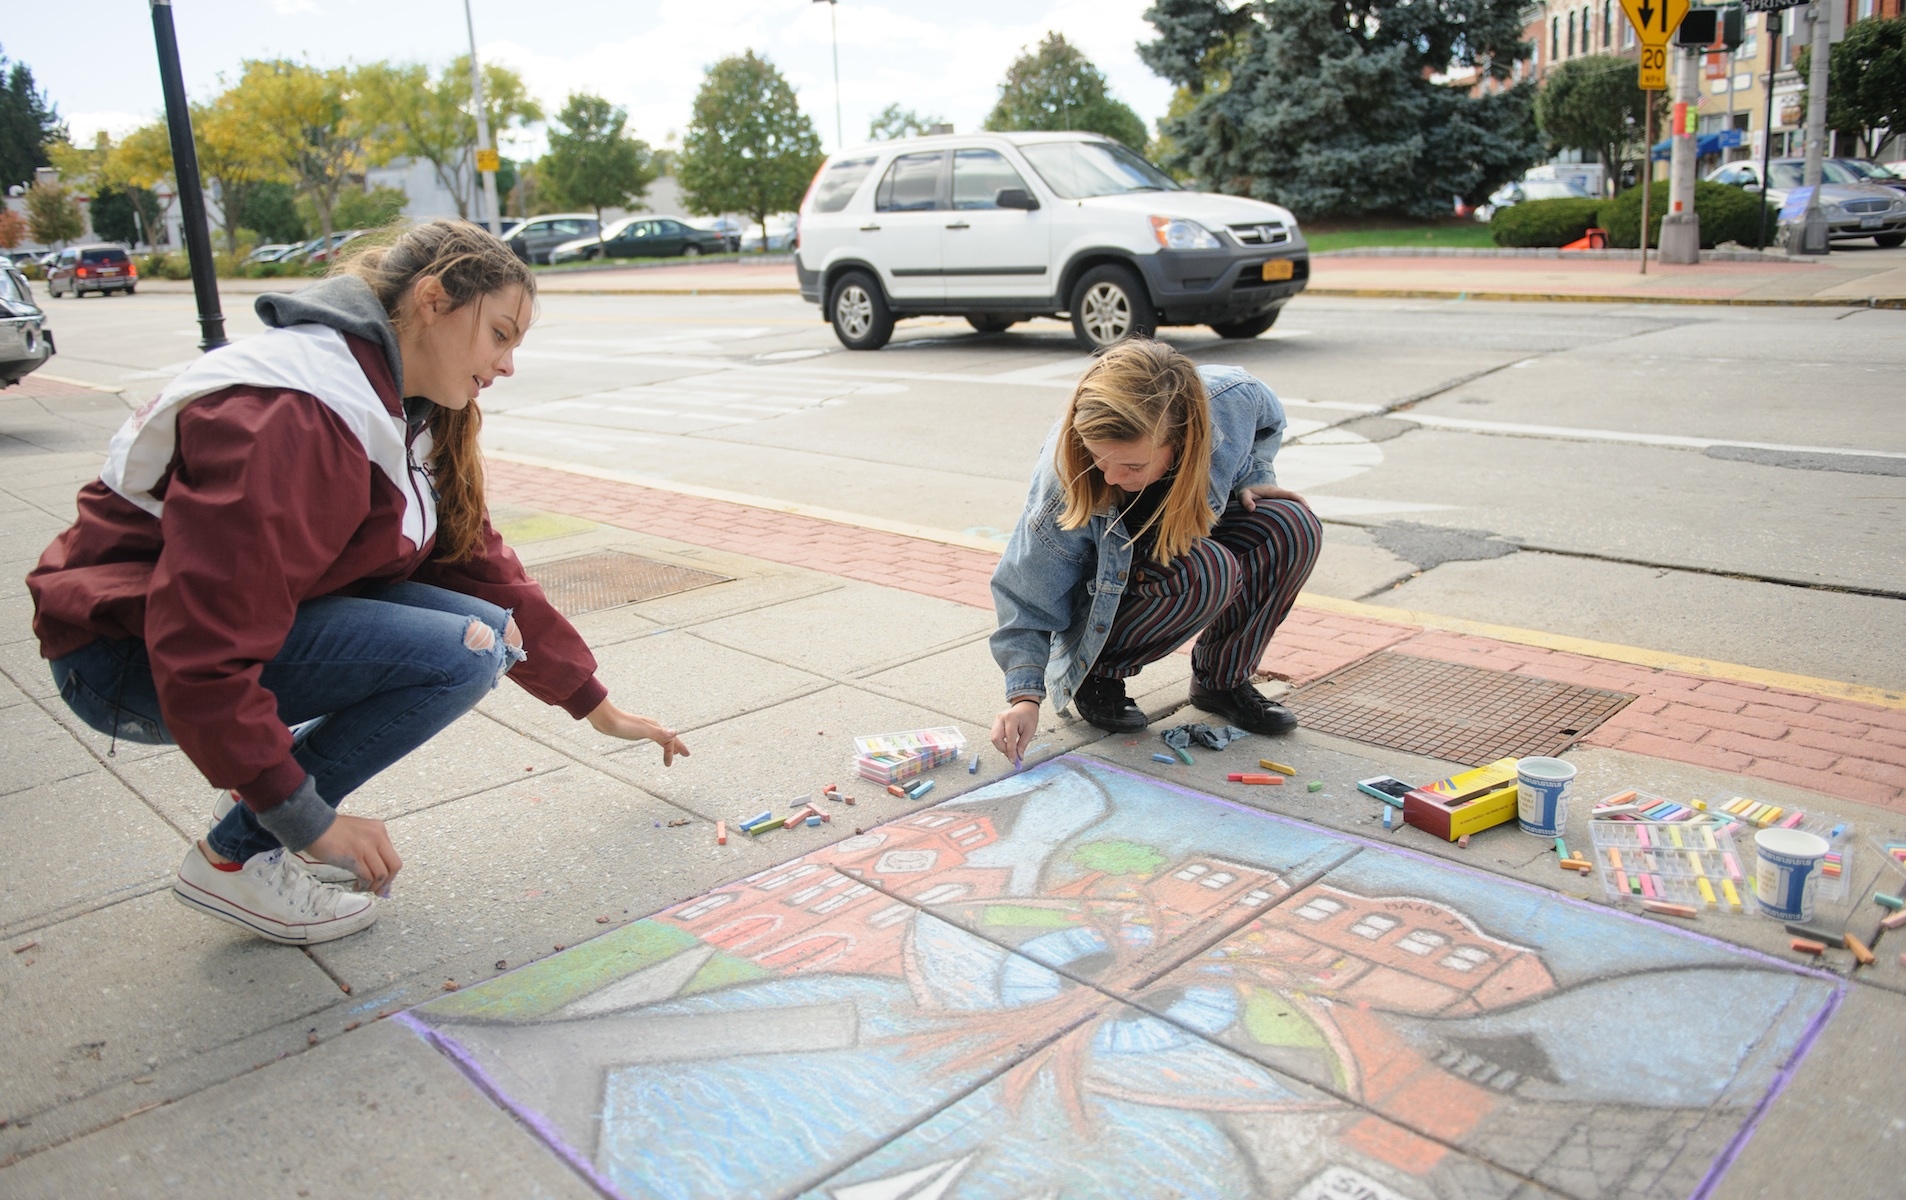 Ossining High School student artists Zoe Supina and Melissa Twomey received first place at the Village of Ossining’s First Annual Chalk It Up! Festival held recently at Market Square.